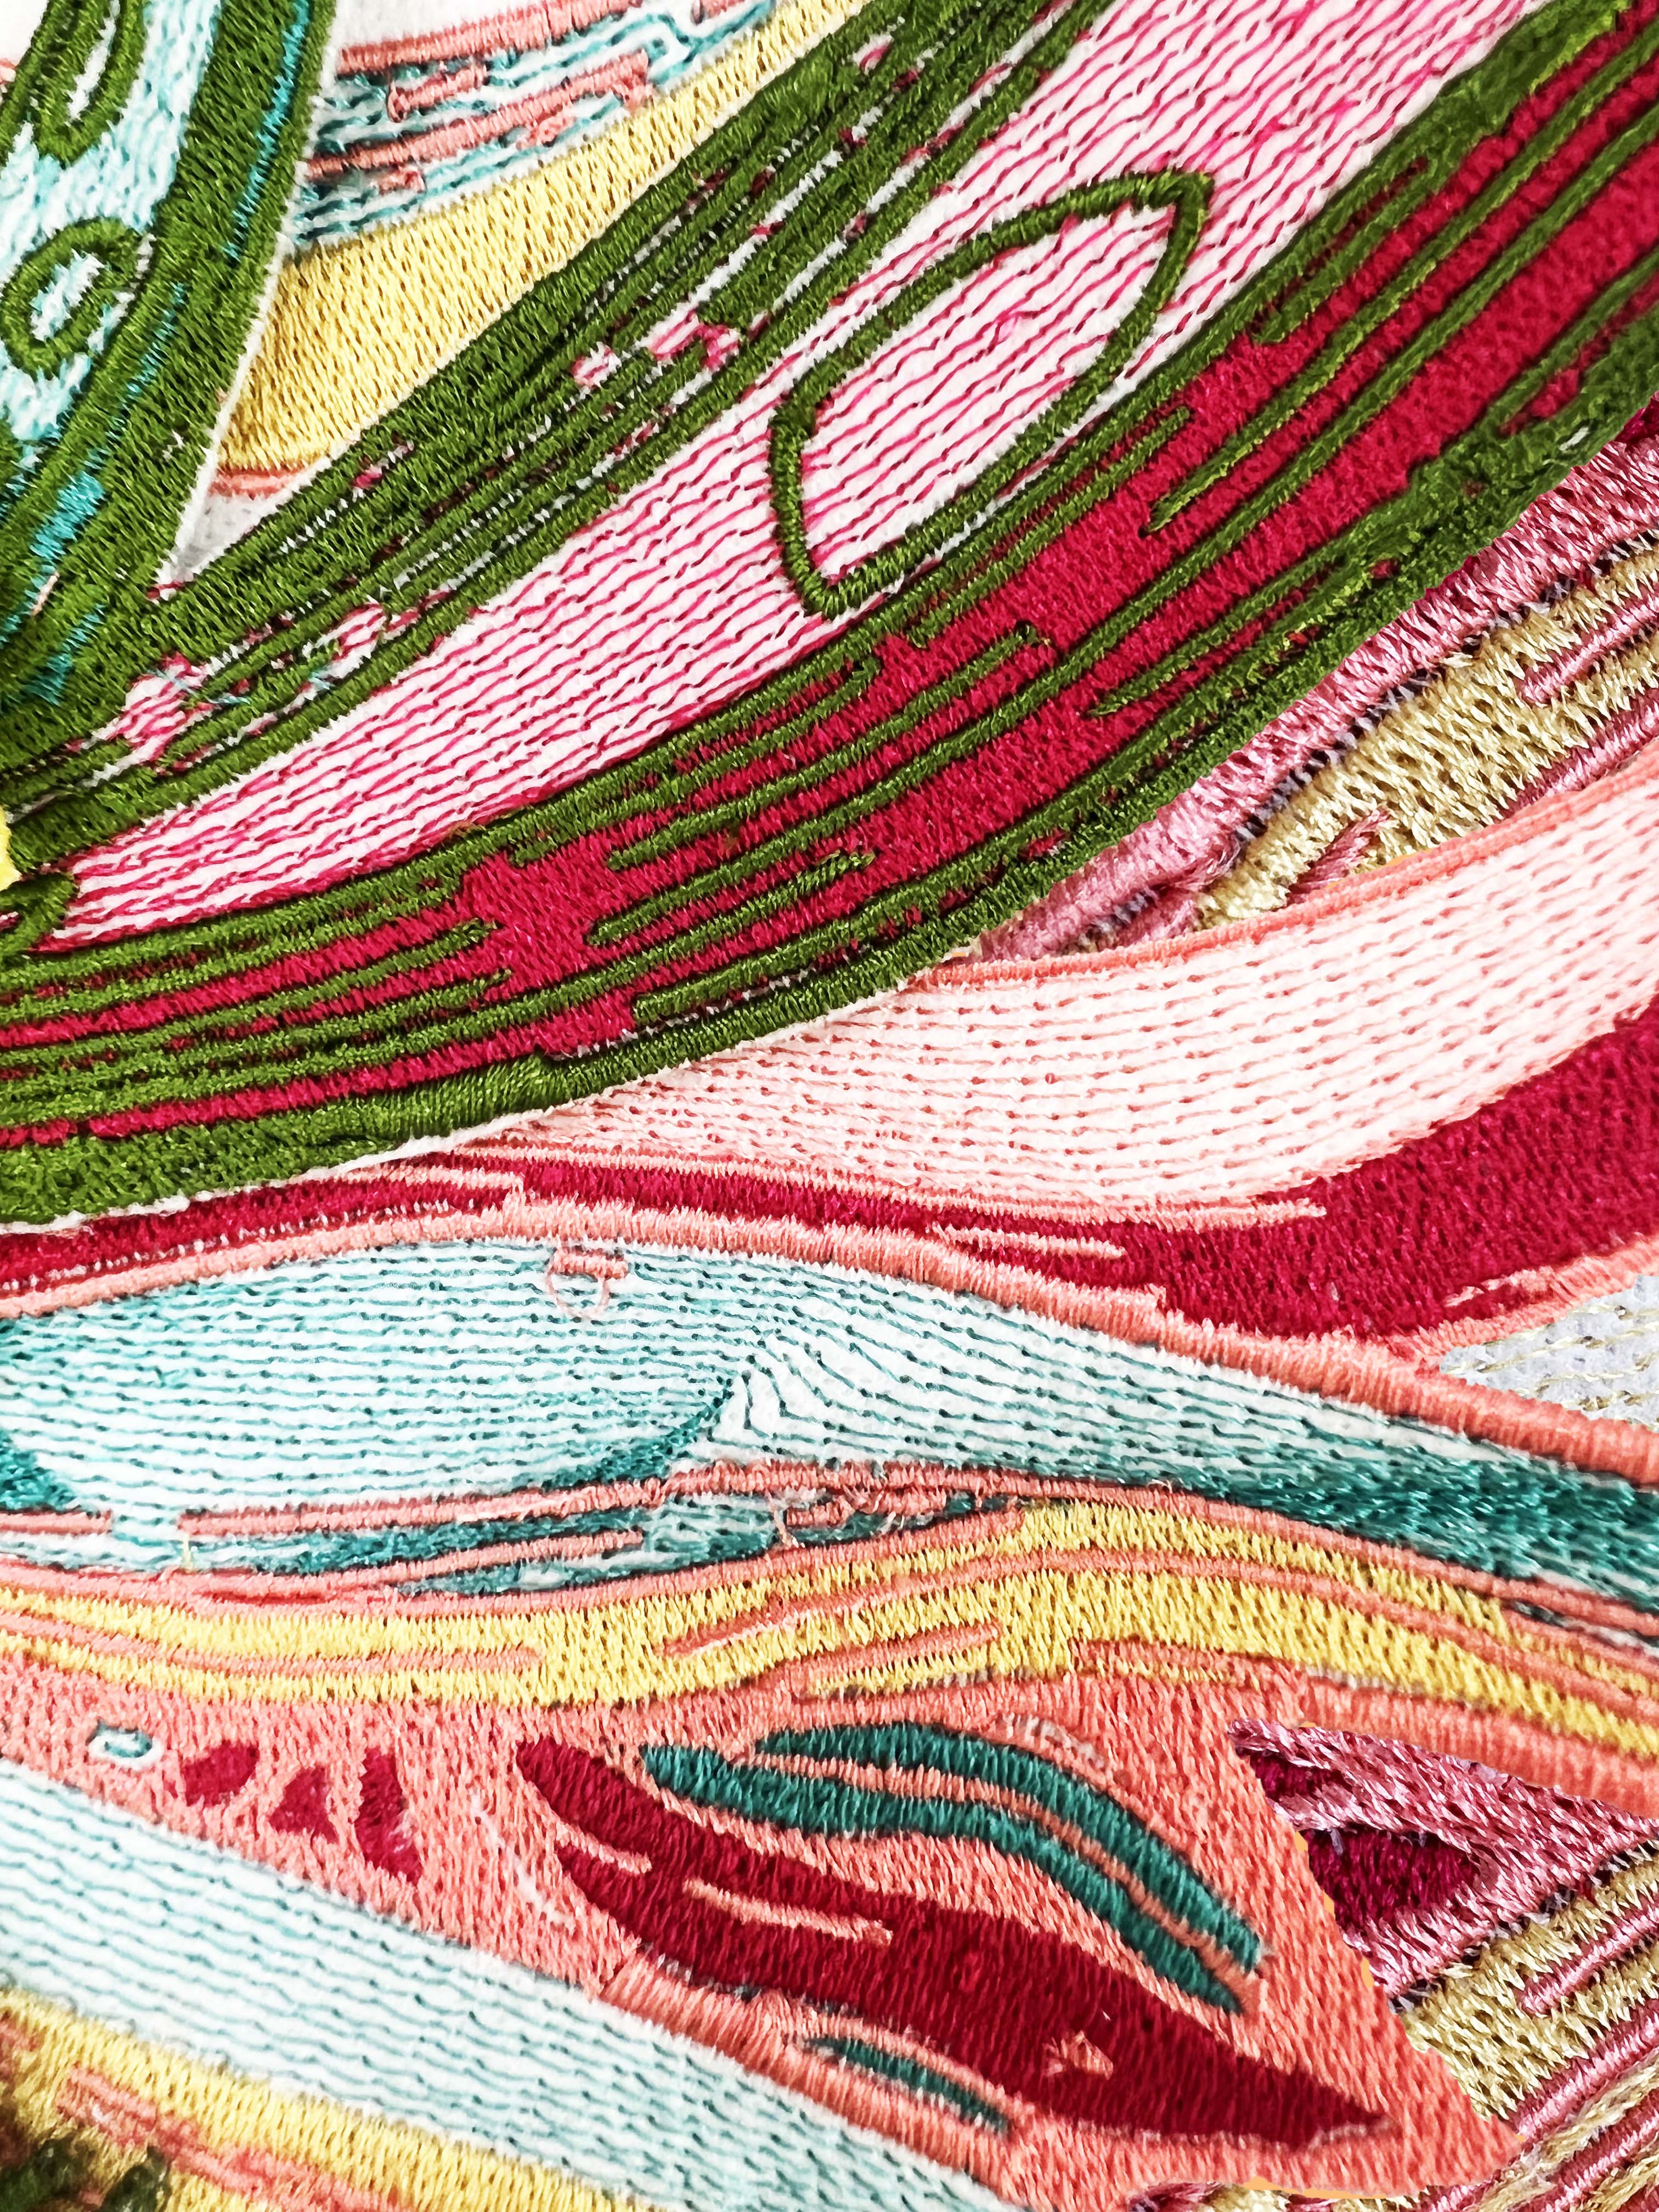 CAD embroidery piece representing the movement, depth, and vibrant colour one might find in nature during the summer season